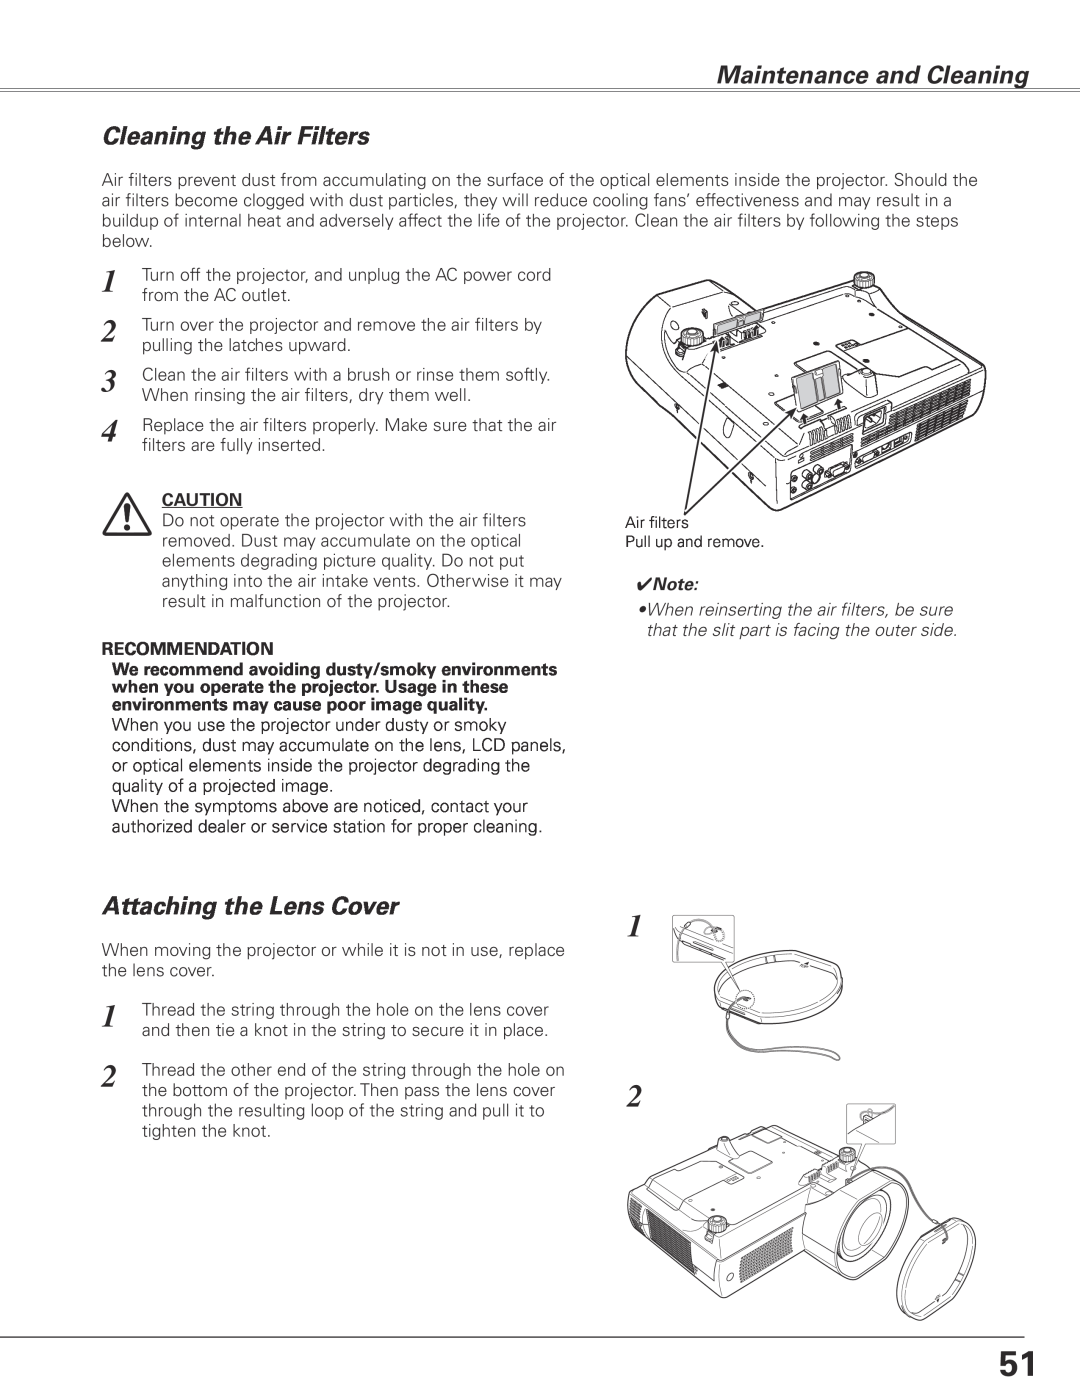 Sanyo PLC-XL45 owner manual Maintenance and Cleaning Cleaning the Air Filters, Attaching the Lens Cover, Recommendation 